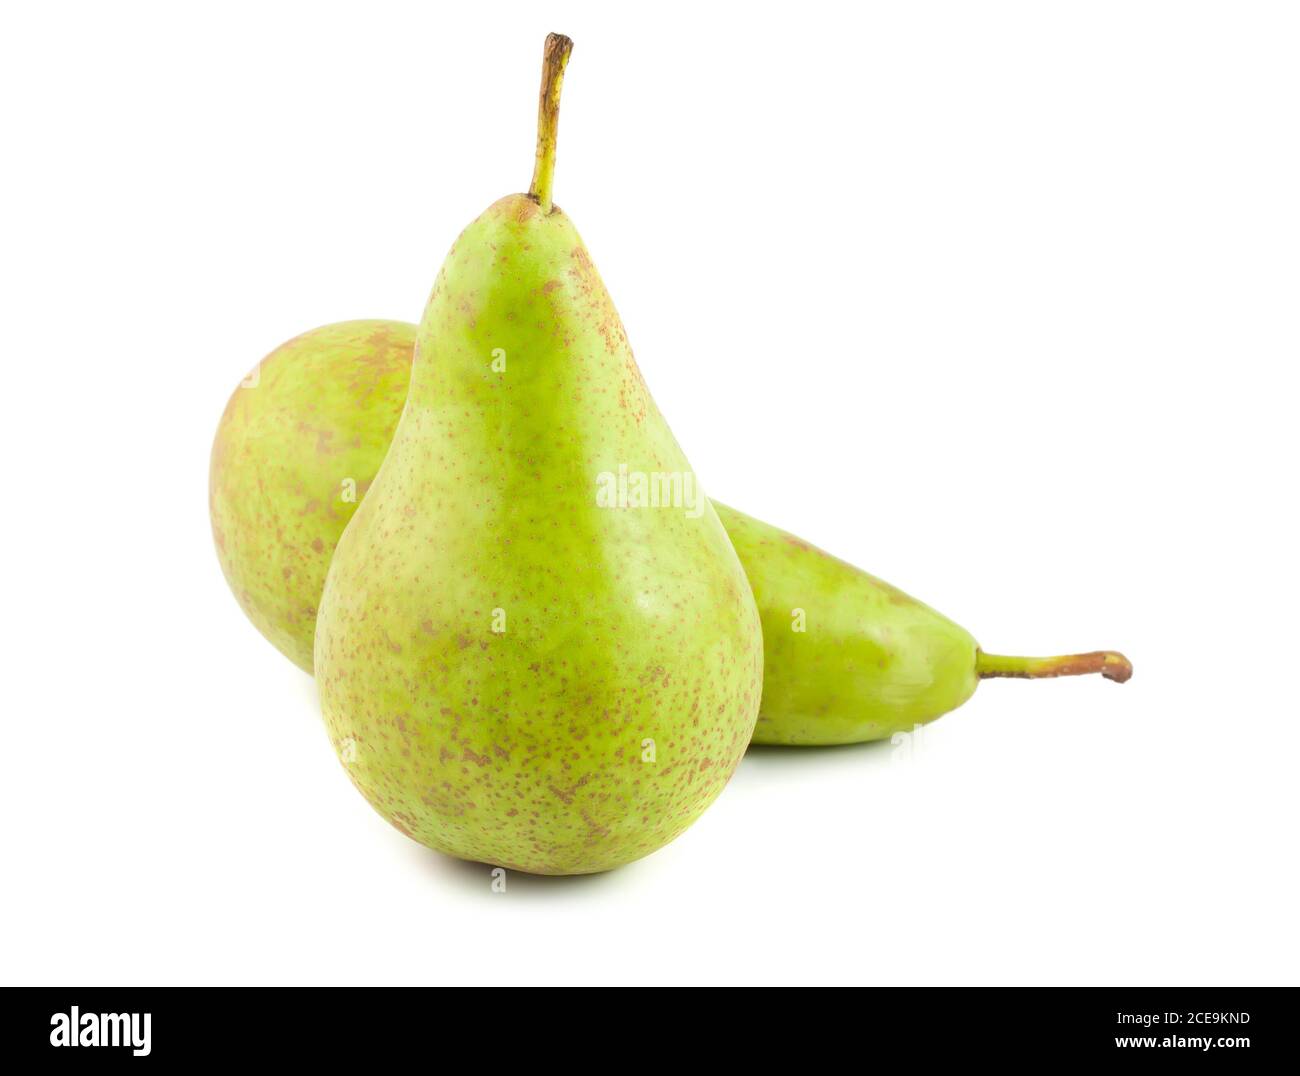 Two green pears Stock Photo